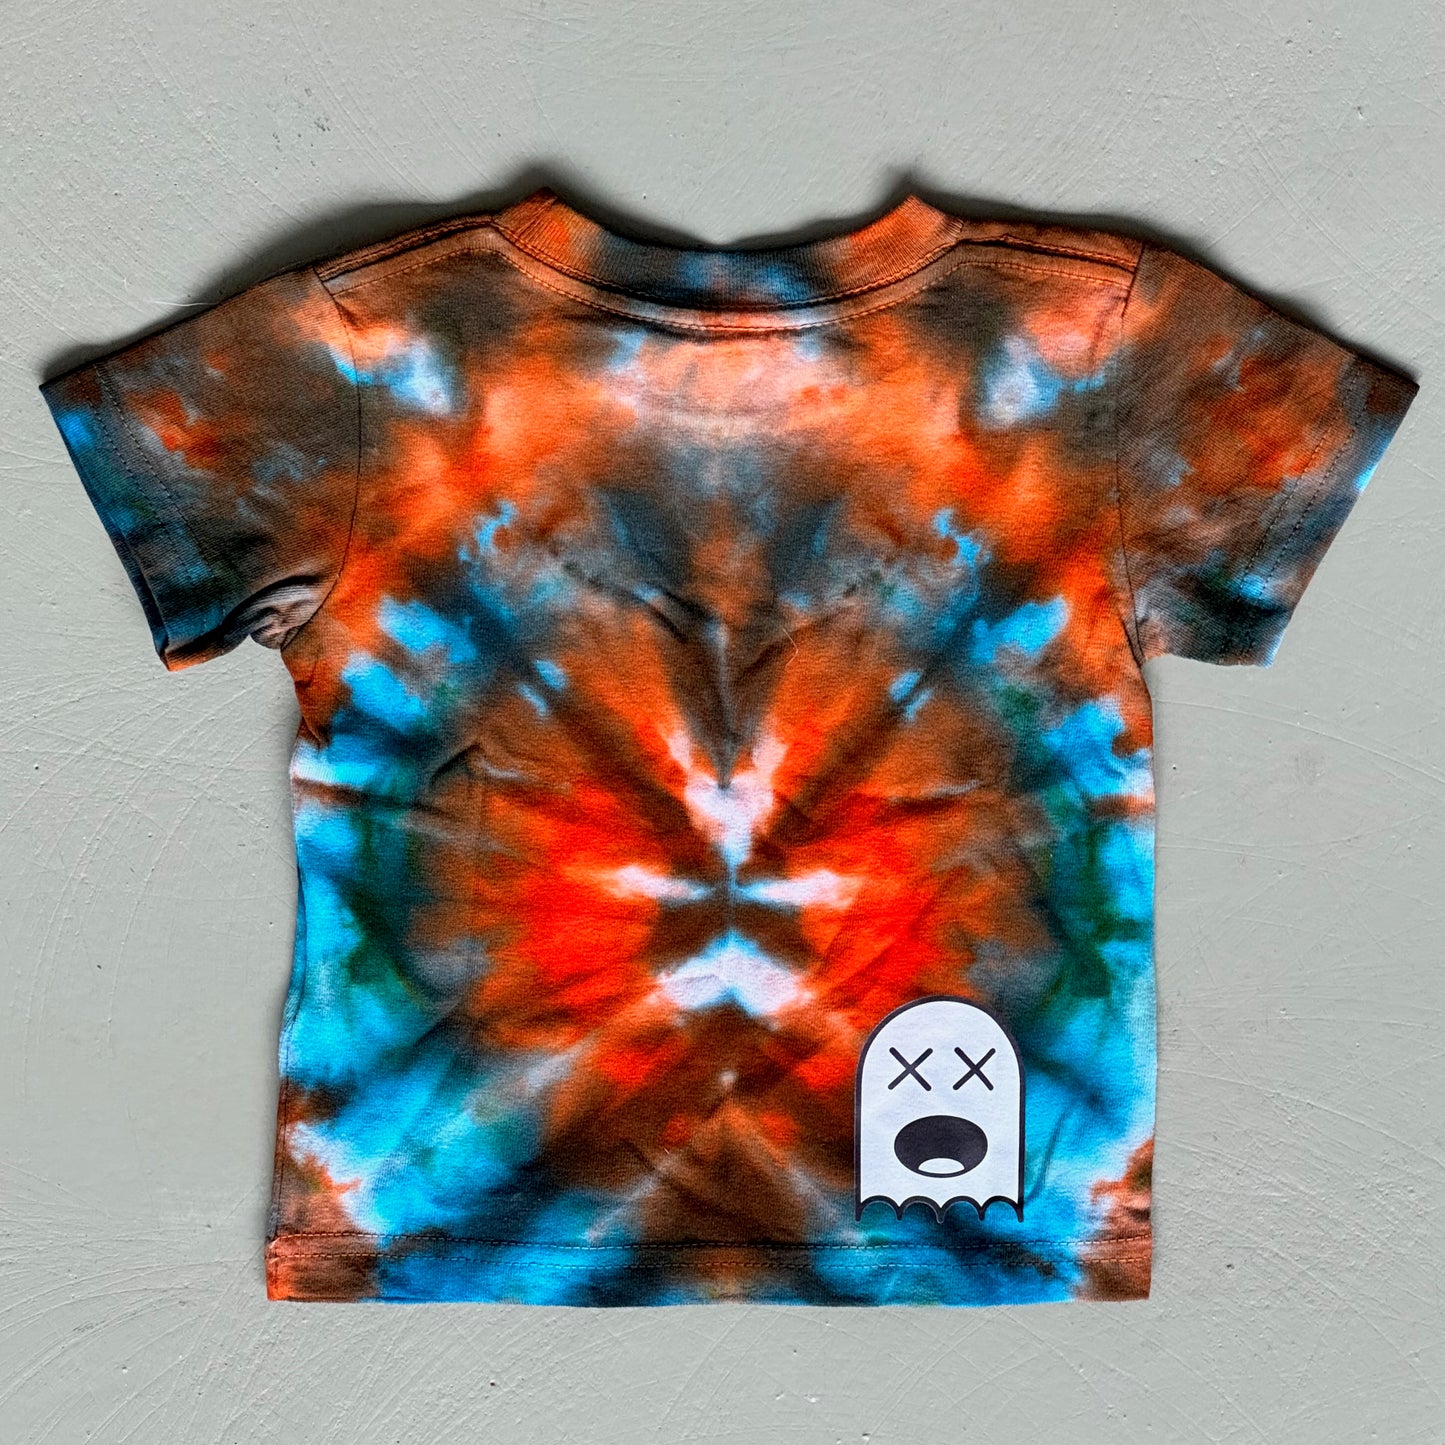 Toddler Wook 24 Months Tie Dye T-Shirt 'Exhausted'